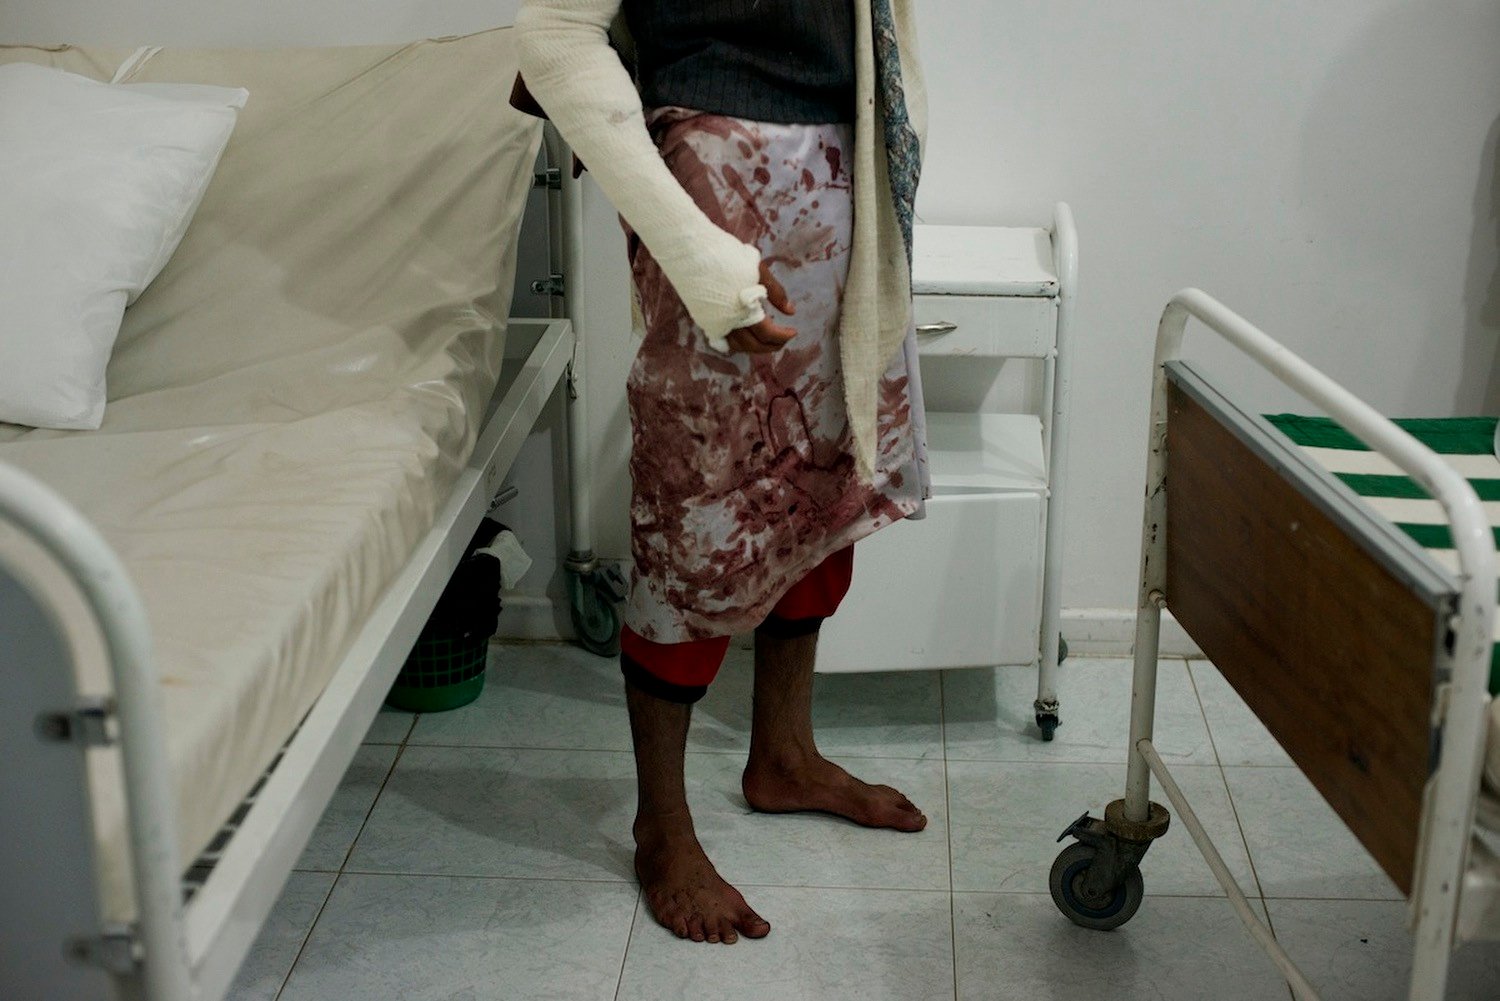 A Yemeni man stands in al Moaiyed Hospital after being wounded by live ammunition fired by government troops.